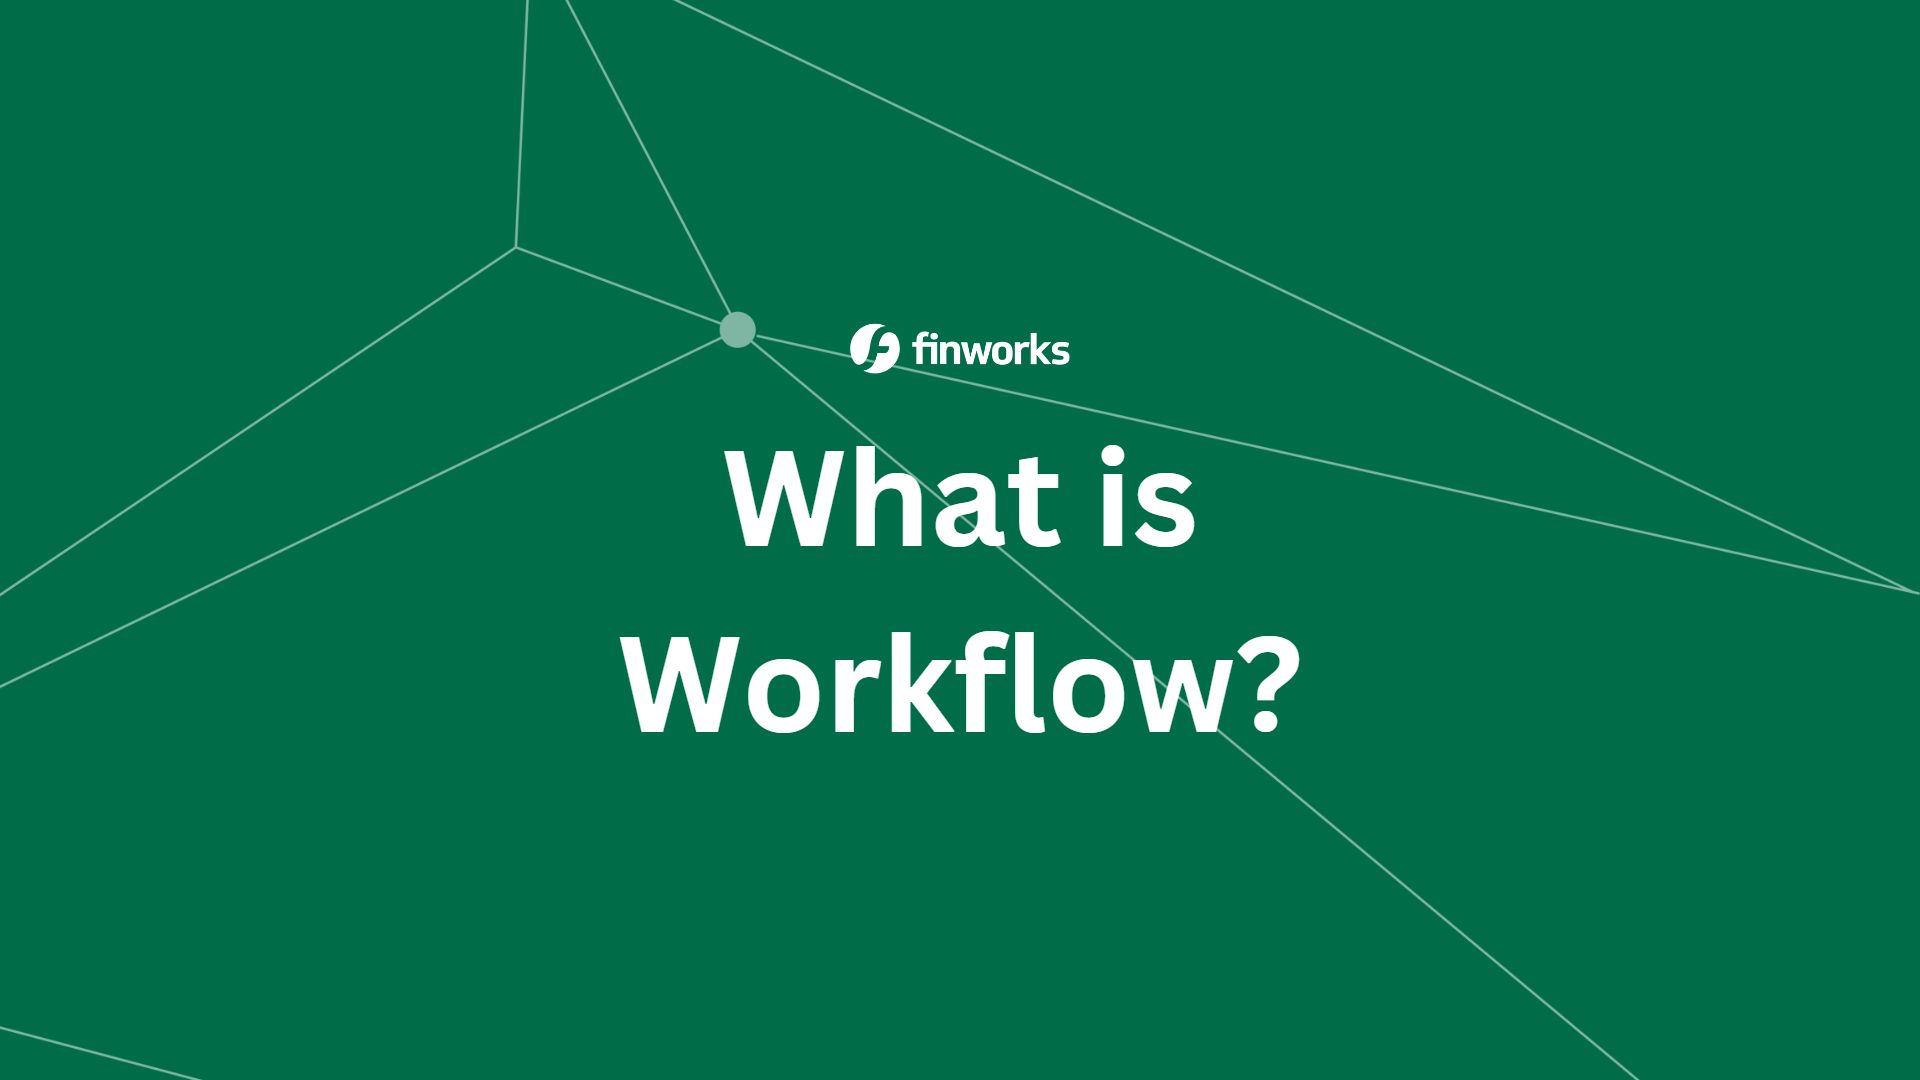 Workflow, what is it and what are the benefits?